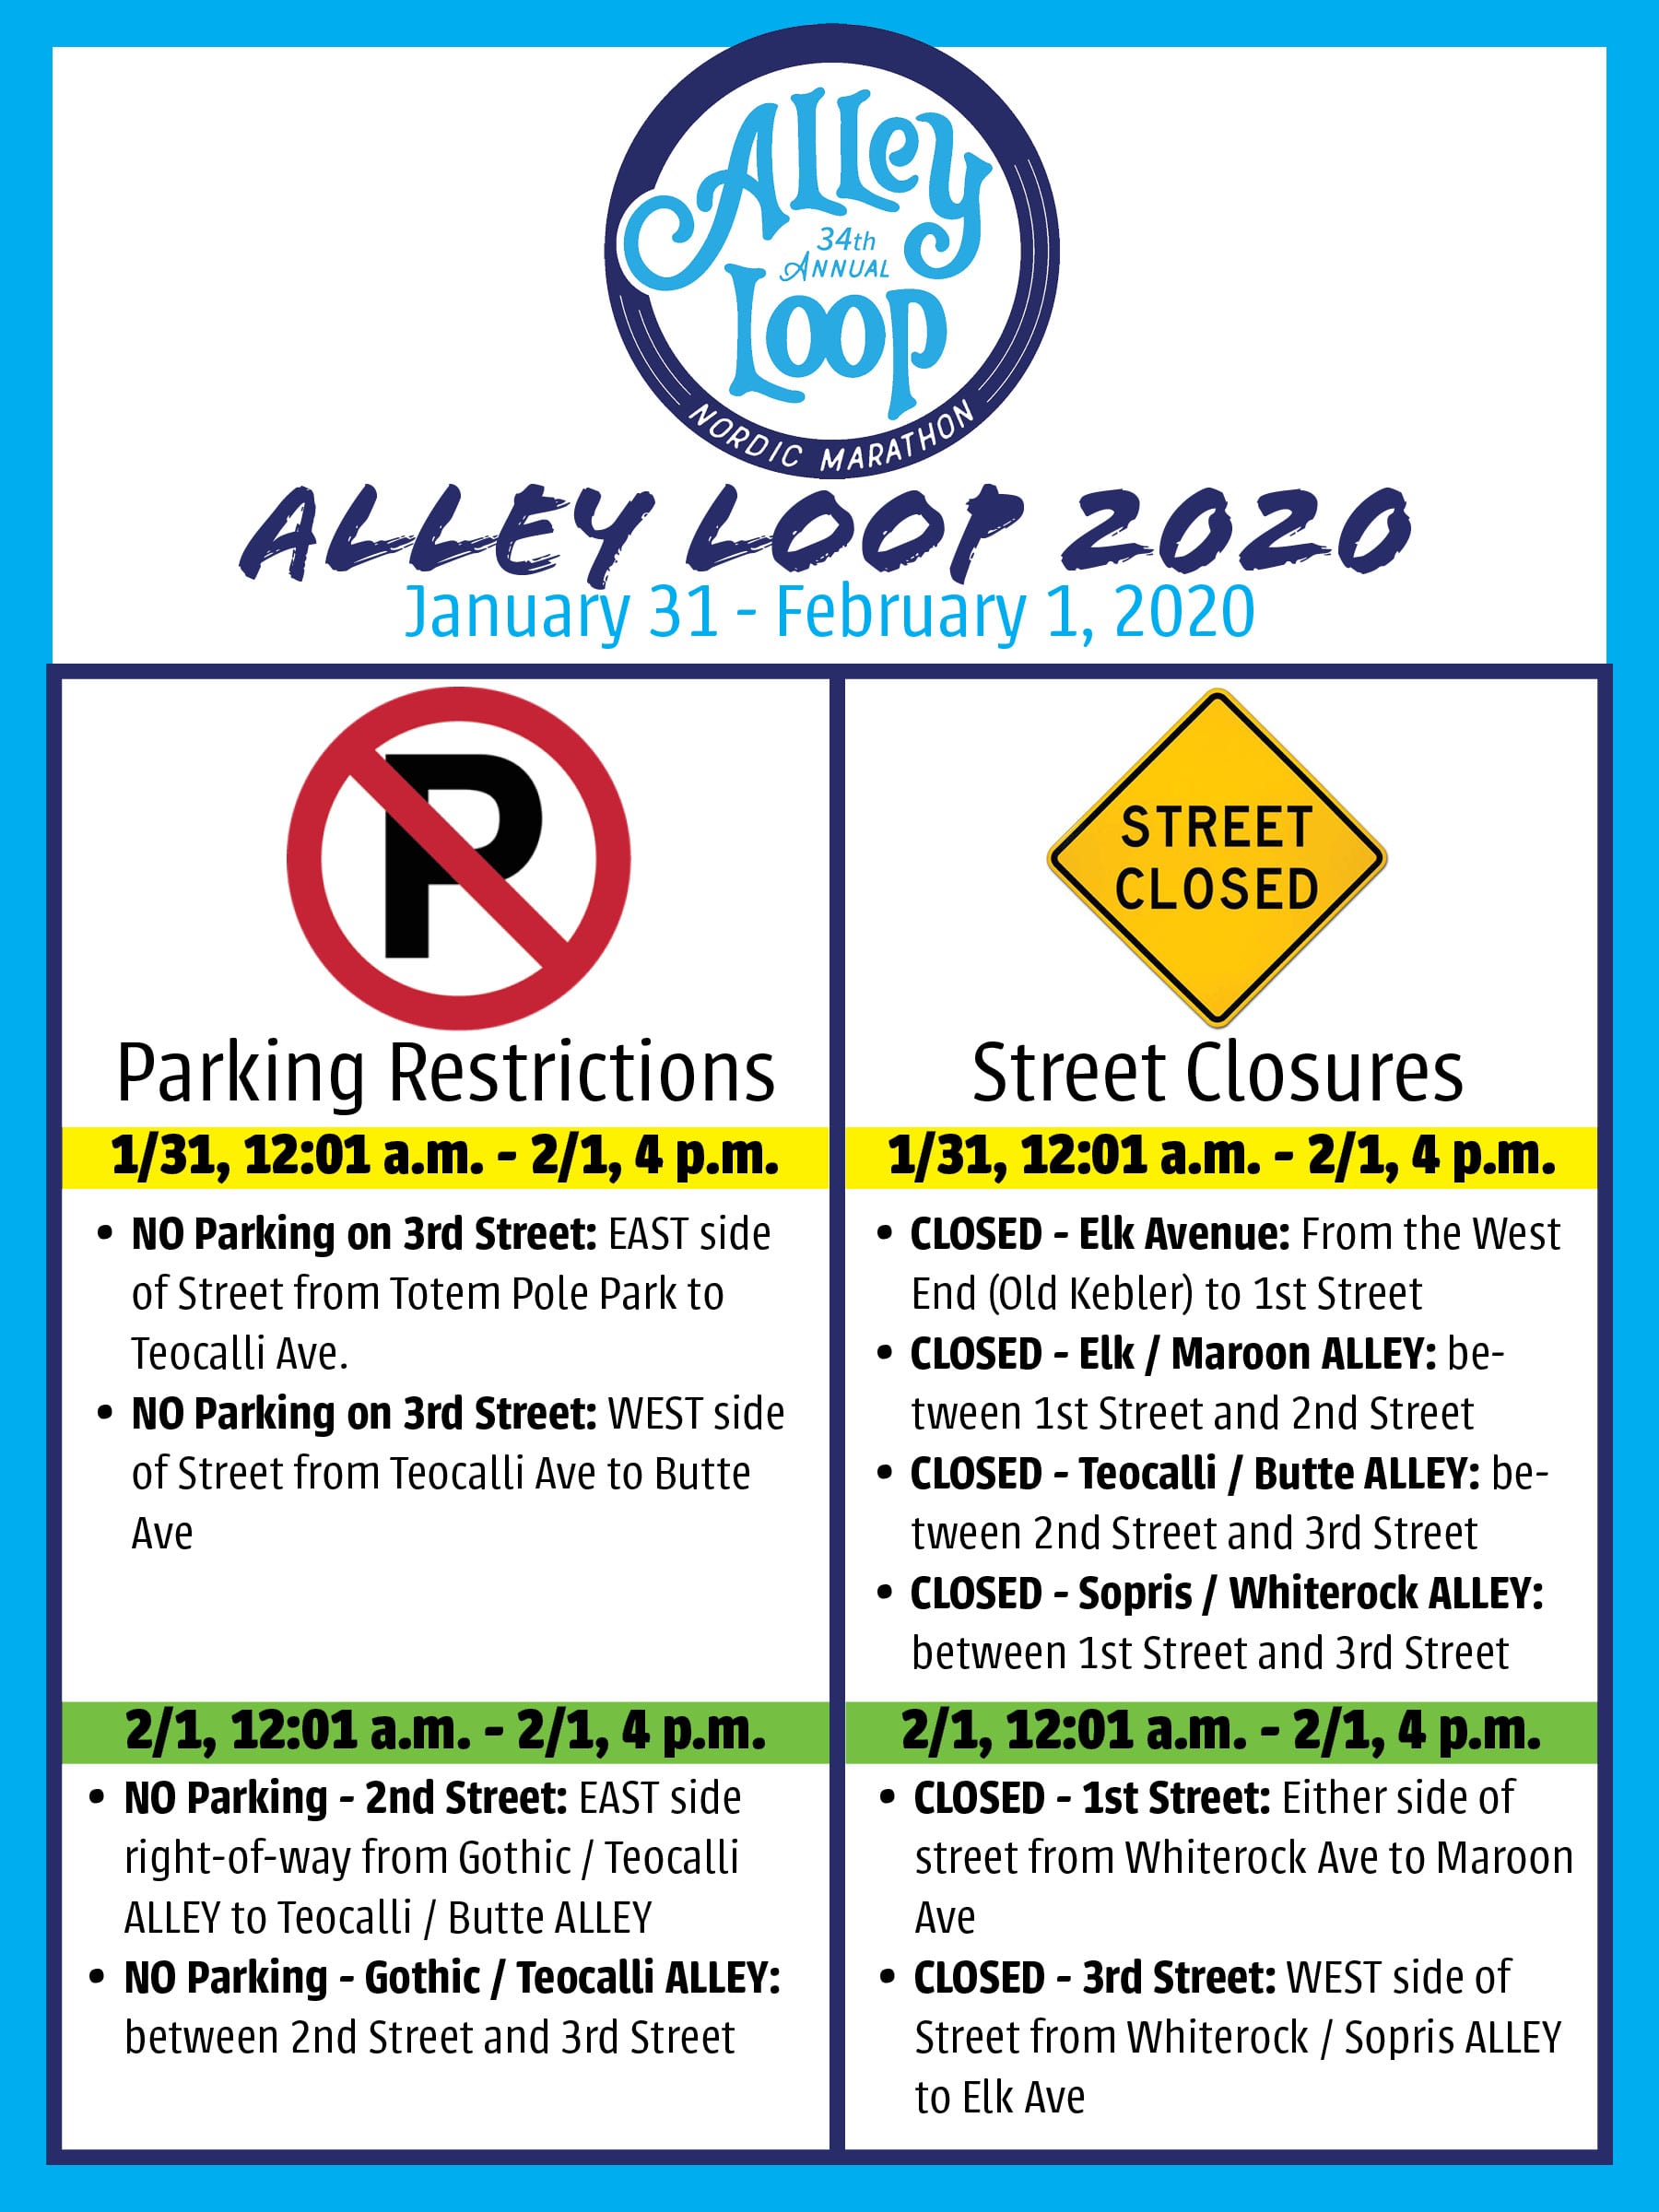 Alley Loop 2020 parking restrictions and street closures